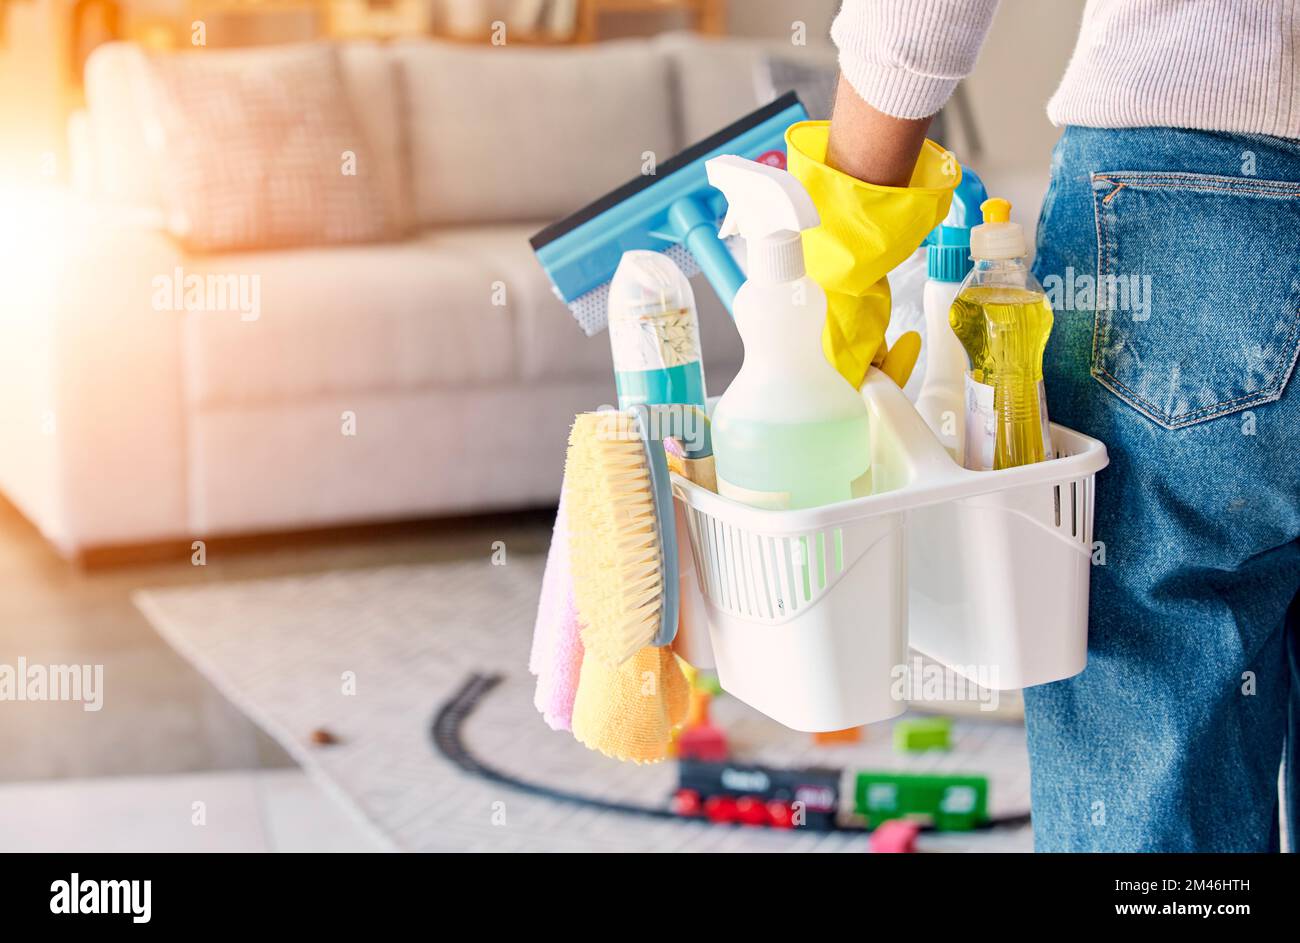 Cleaning, hand and basket of cleaning supplies for family home hygiene with a brush, bottles and gloves. Woman, cleaning supplies and housekeeper Stock Photo